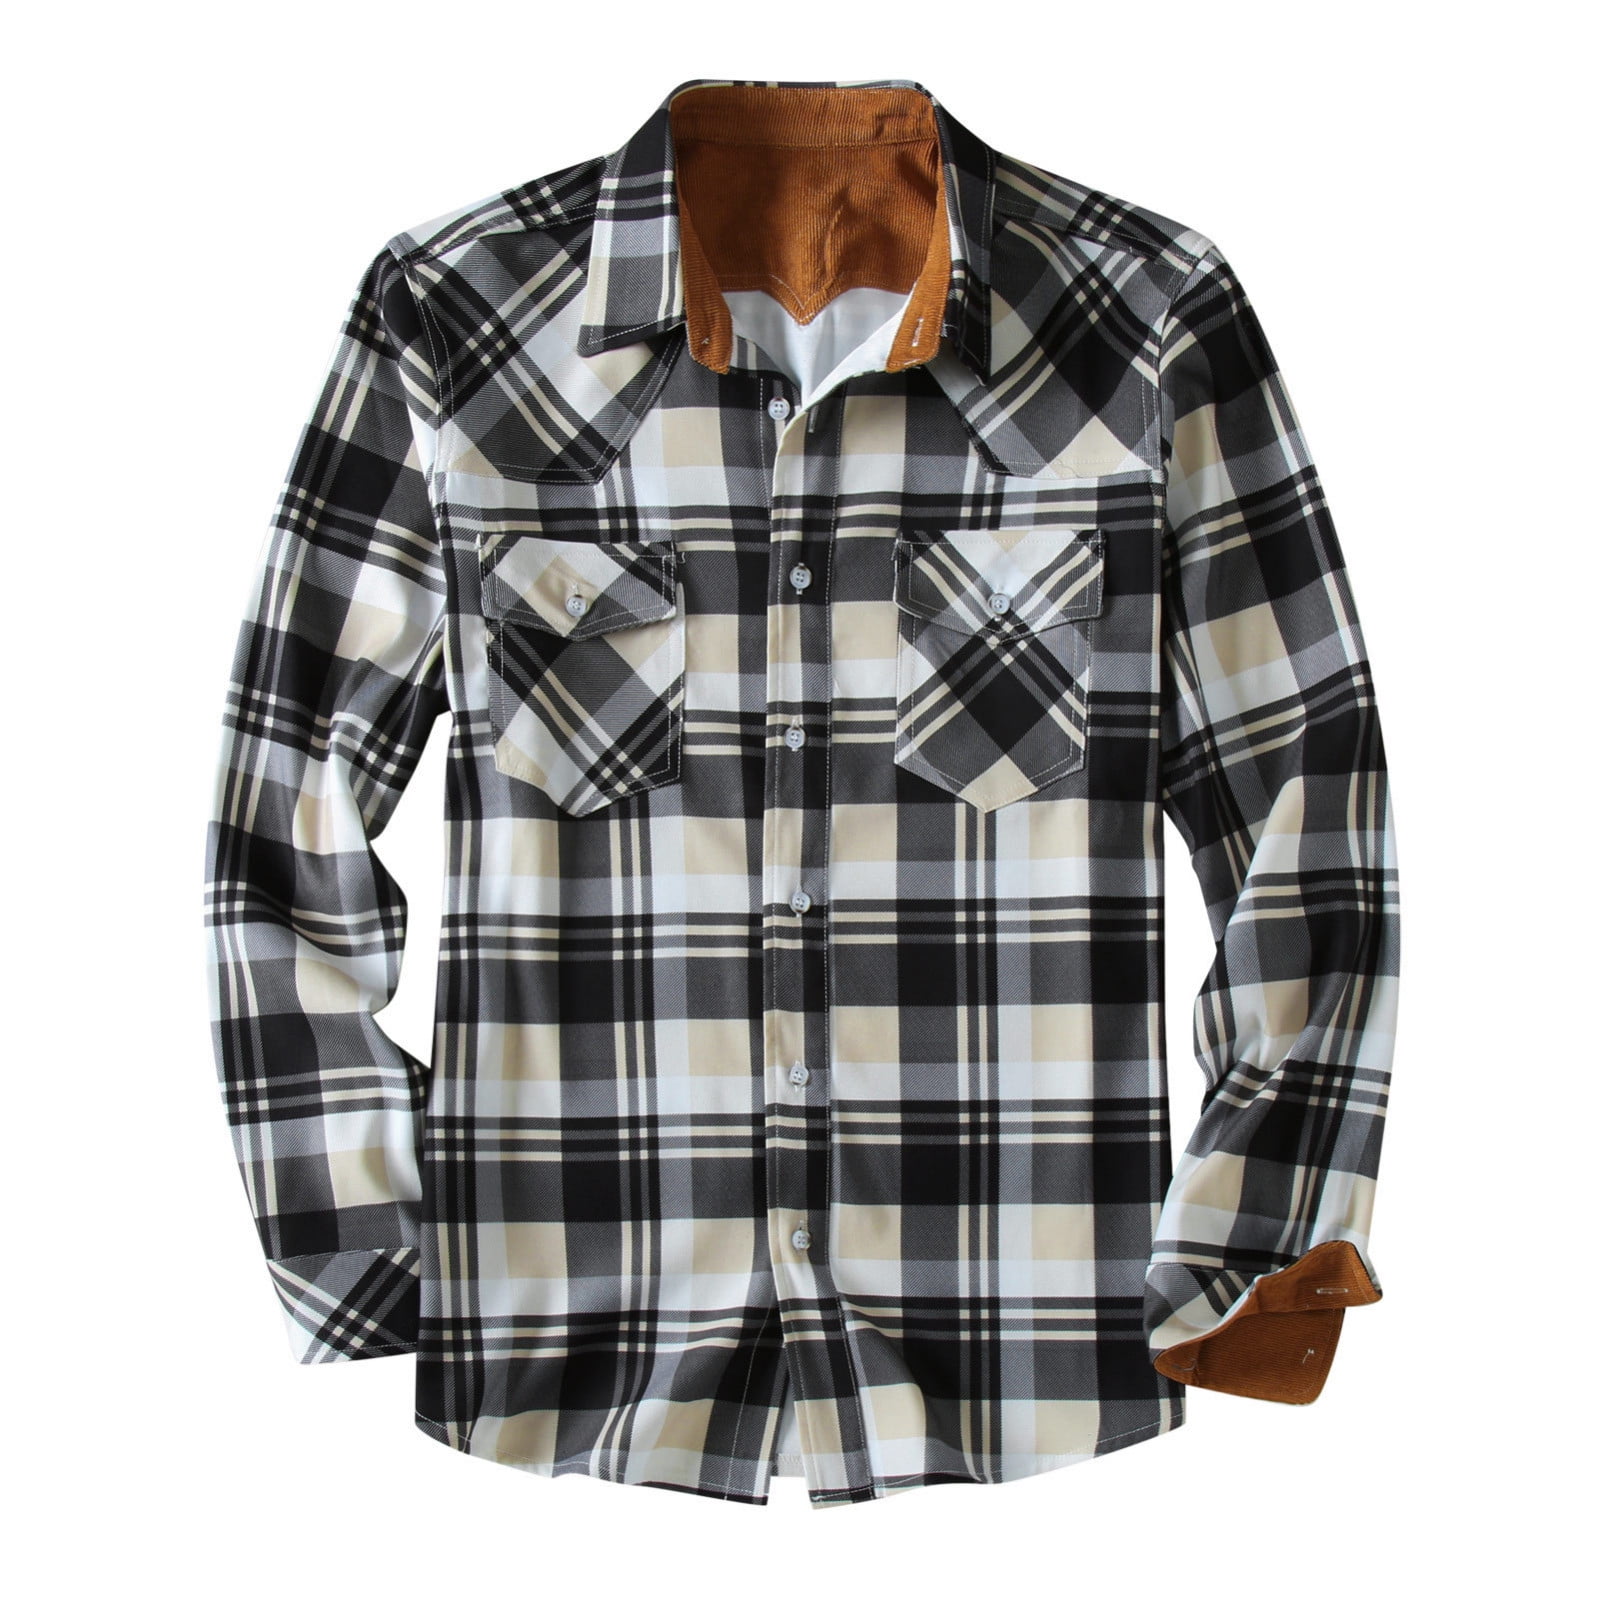 YYDGH Flannel Shirt for Men Long Sleeve Casual Button-Down Regular